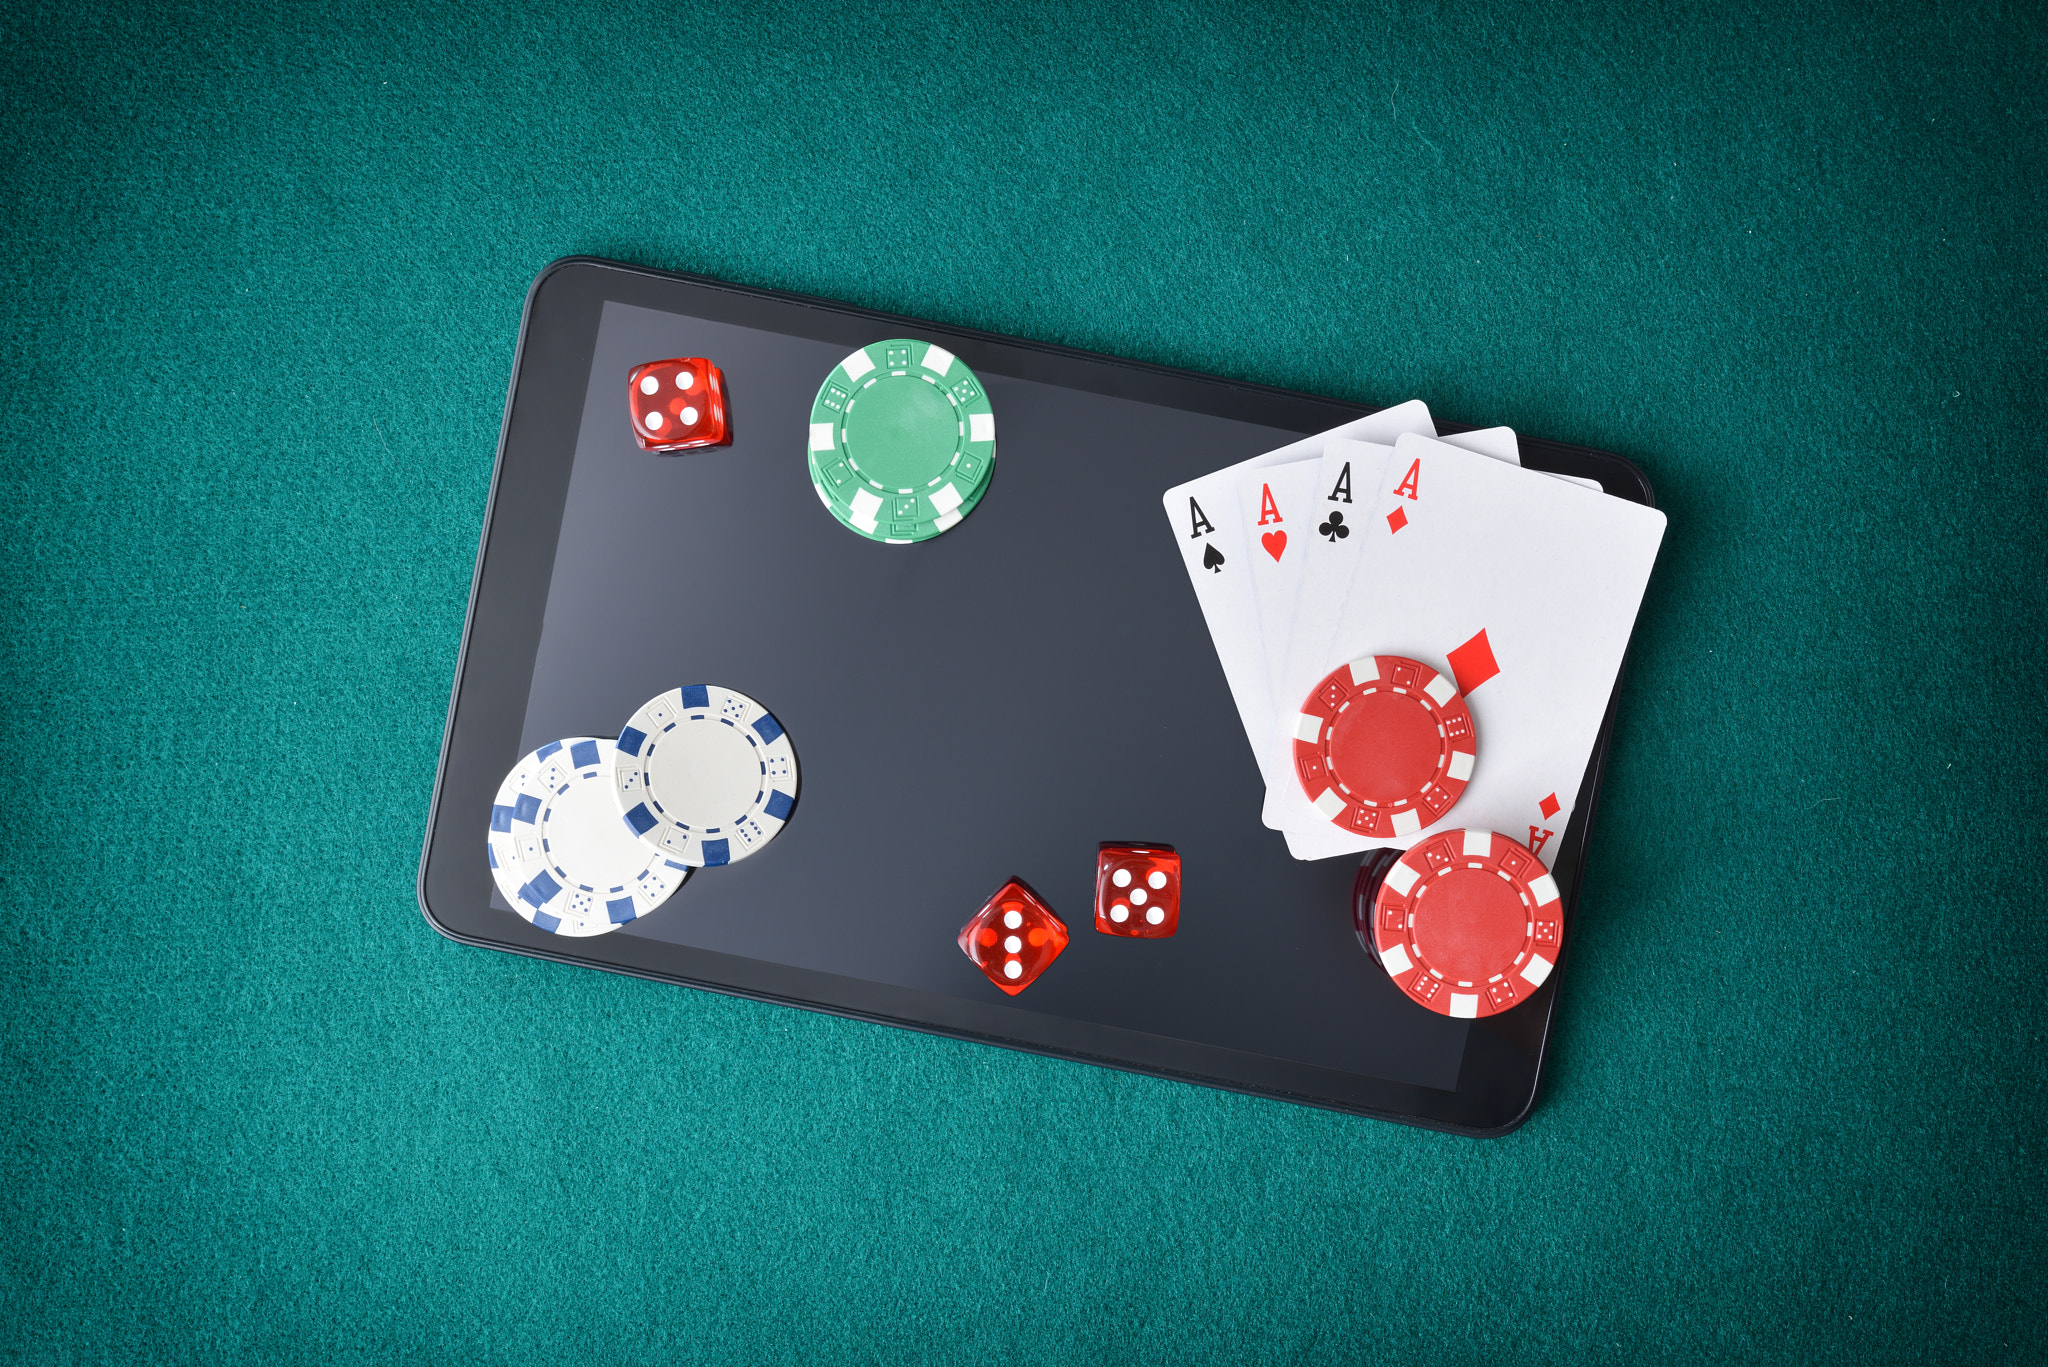 Online casino games with objects on tablet on green mat